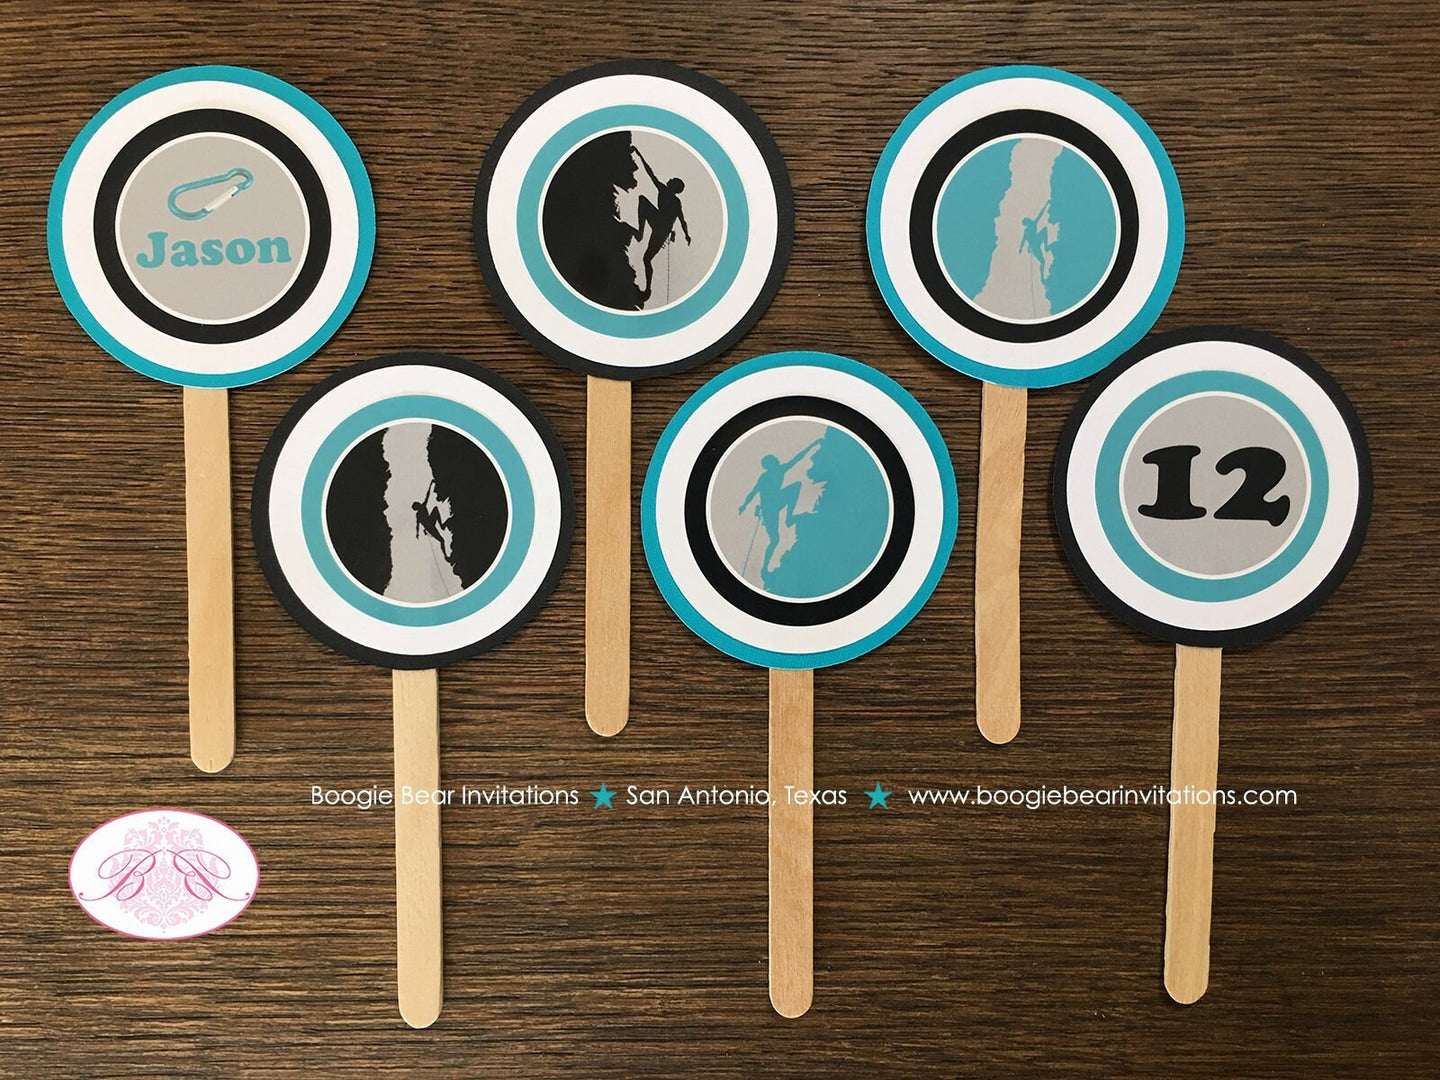 Rock Climbing Party Cupcake Toppers Birthday Mountain Black Aqua Teal Turquoise Blue Boy Girl Spelunking Boogie Bear Invitations Jason Theme